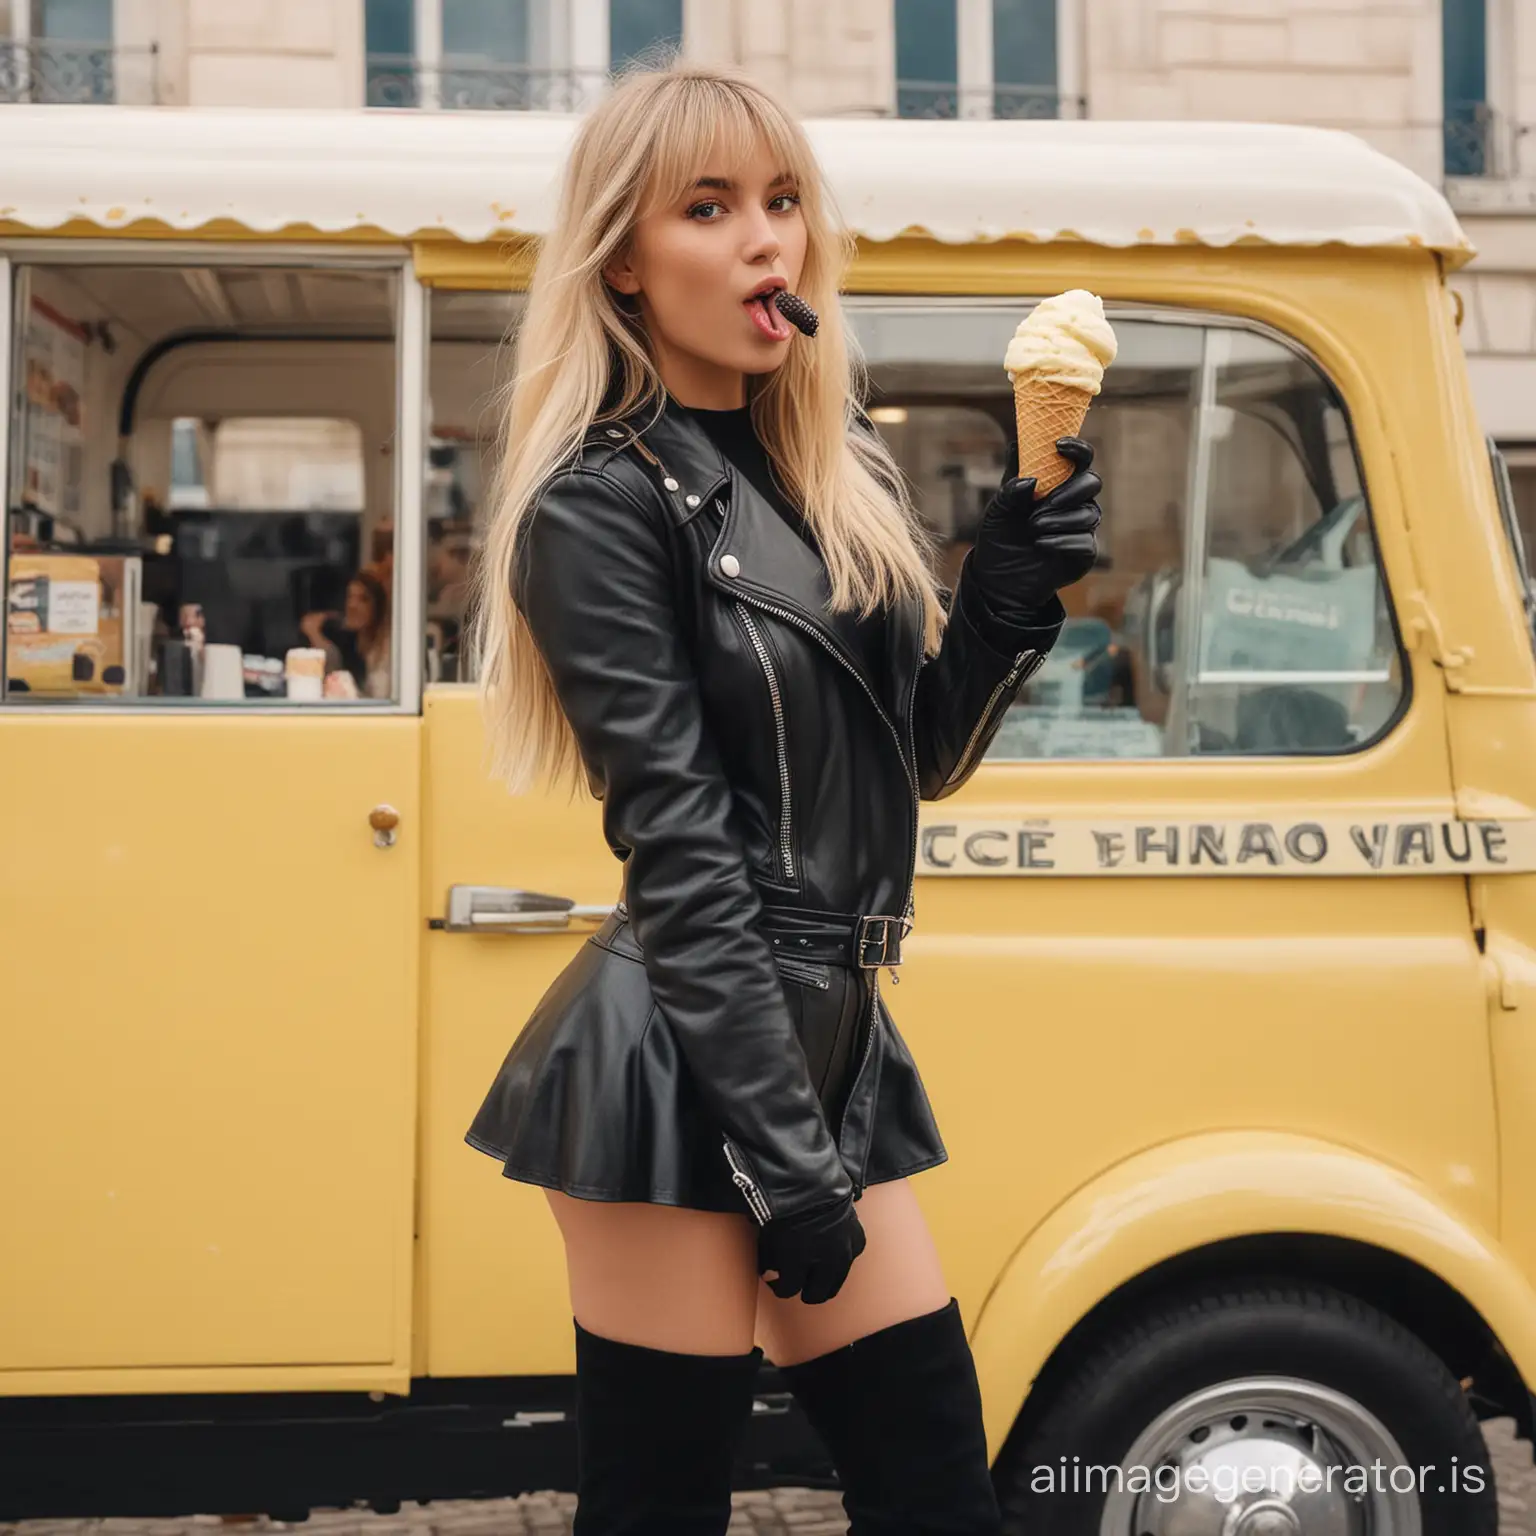 One beautiful young Super Model with l long blond hair, with  bangs hair, black leather  jacket and black high overknee boots and black gloves, standing in front of a yellow and black French Citroen Ice Cream Van for selling Ice Cream. Girl is licking the ice cream with her long tongue.